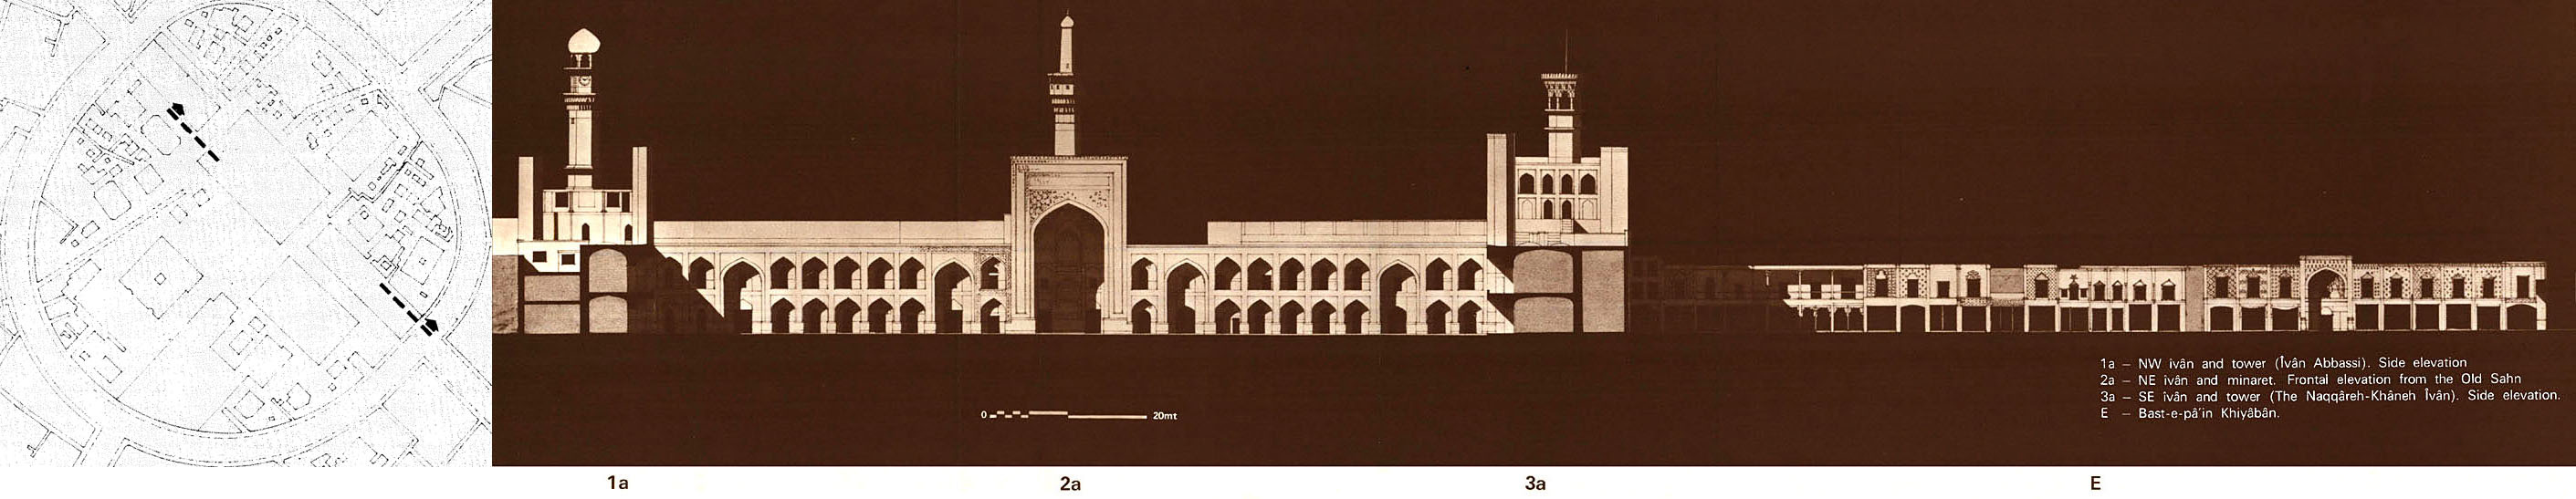 Longitudinal section, showing from left to right: side elevation of NW iwan and tower (or, Iwan Abbasi, 1a); frontal elevation of NE iwan and minaret from old courtyard (2a); side elevation of SE iwan and tower (or, Naqqare-Khane Iwan, 3a); Bast-e-Pa'in Khiyaban (E)